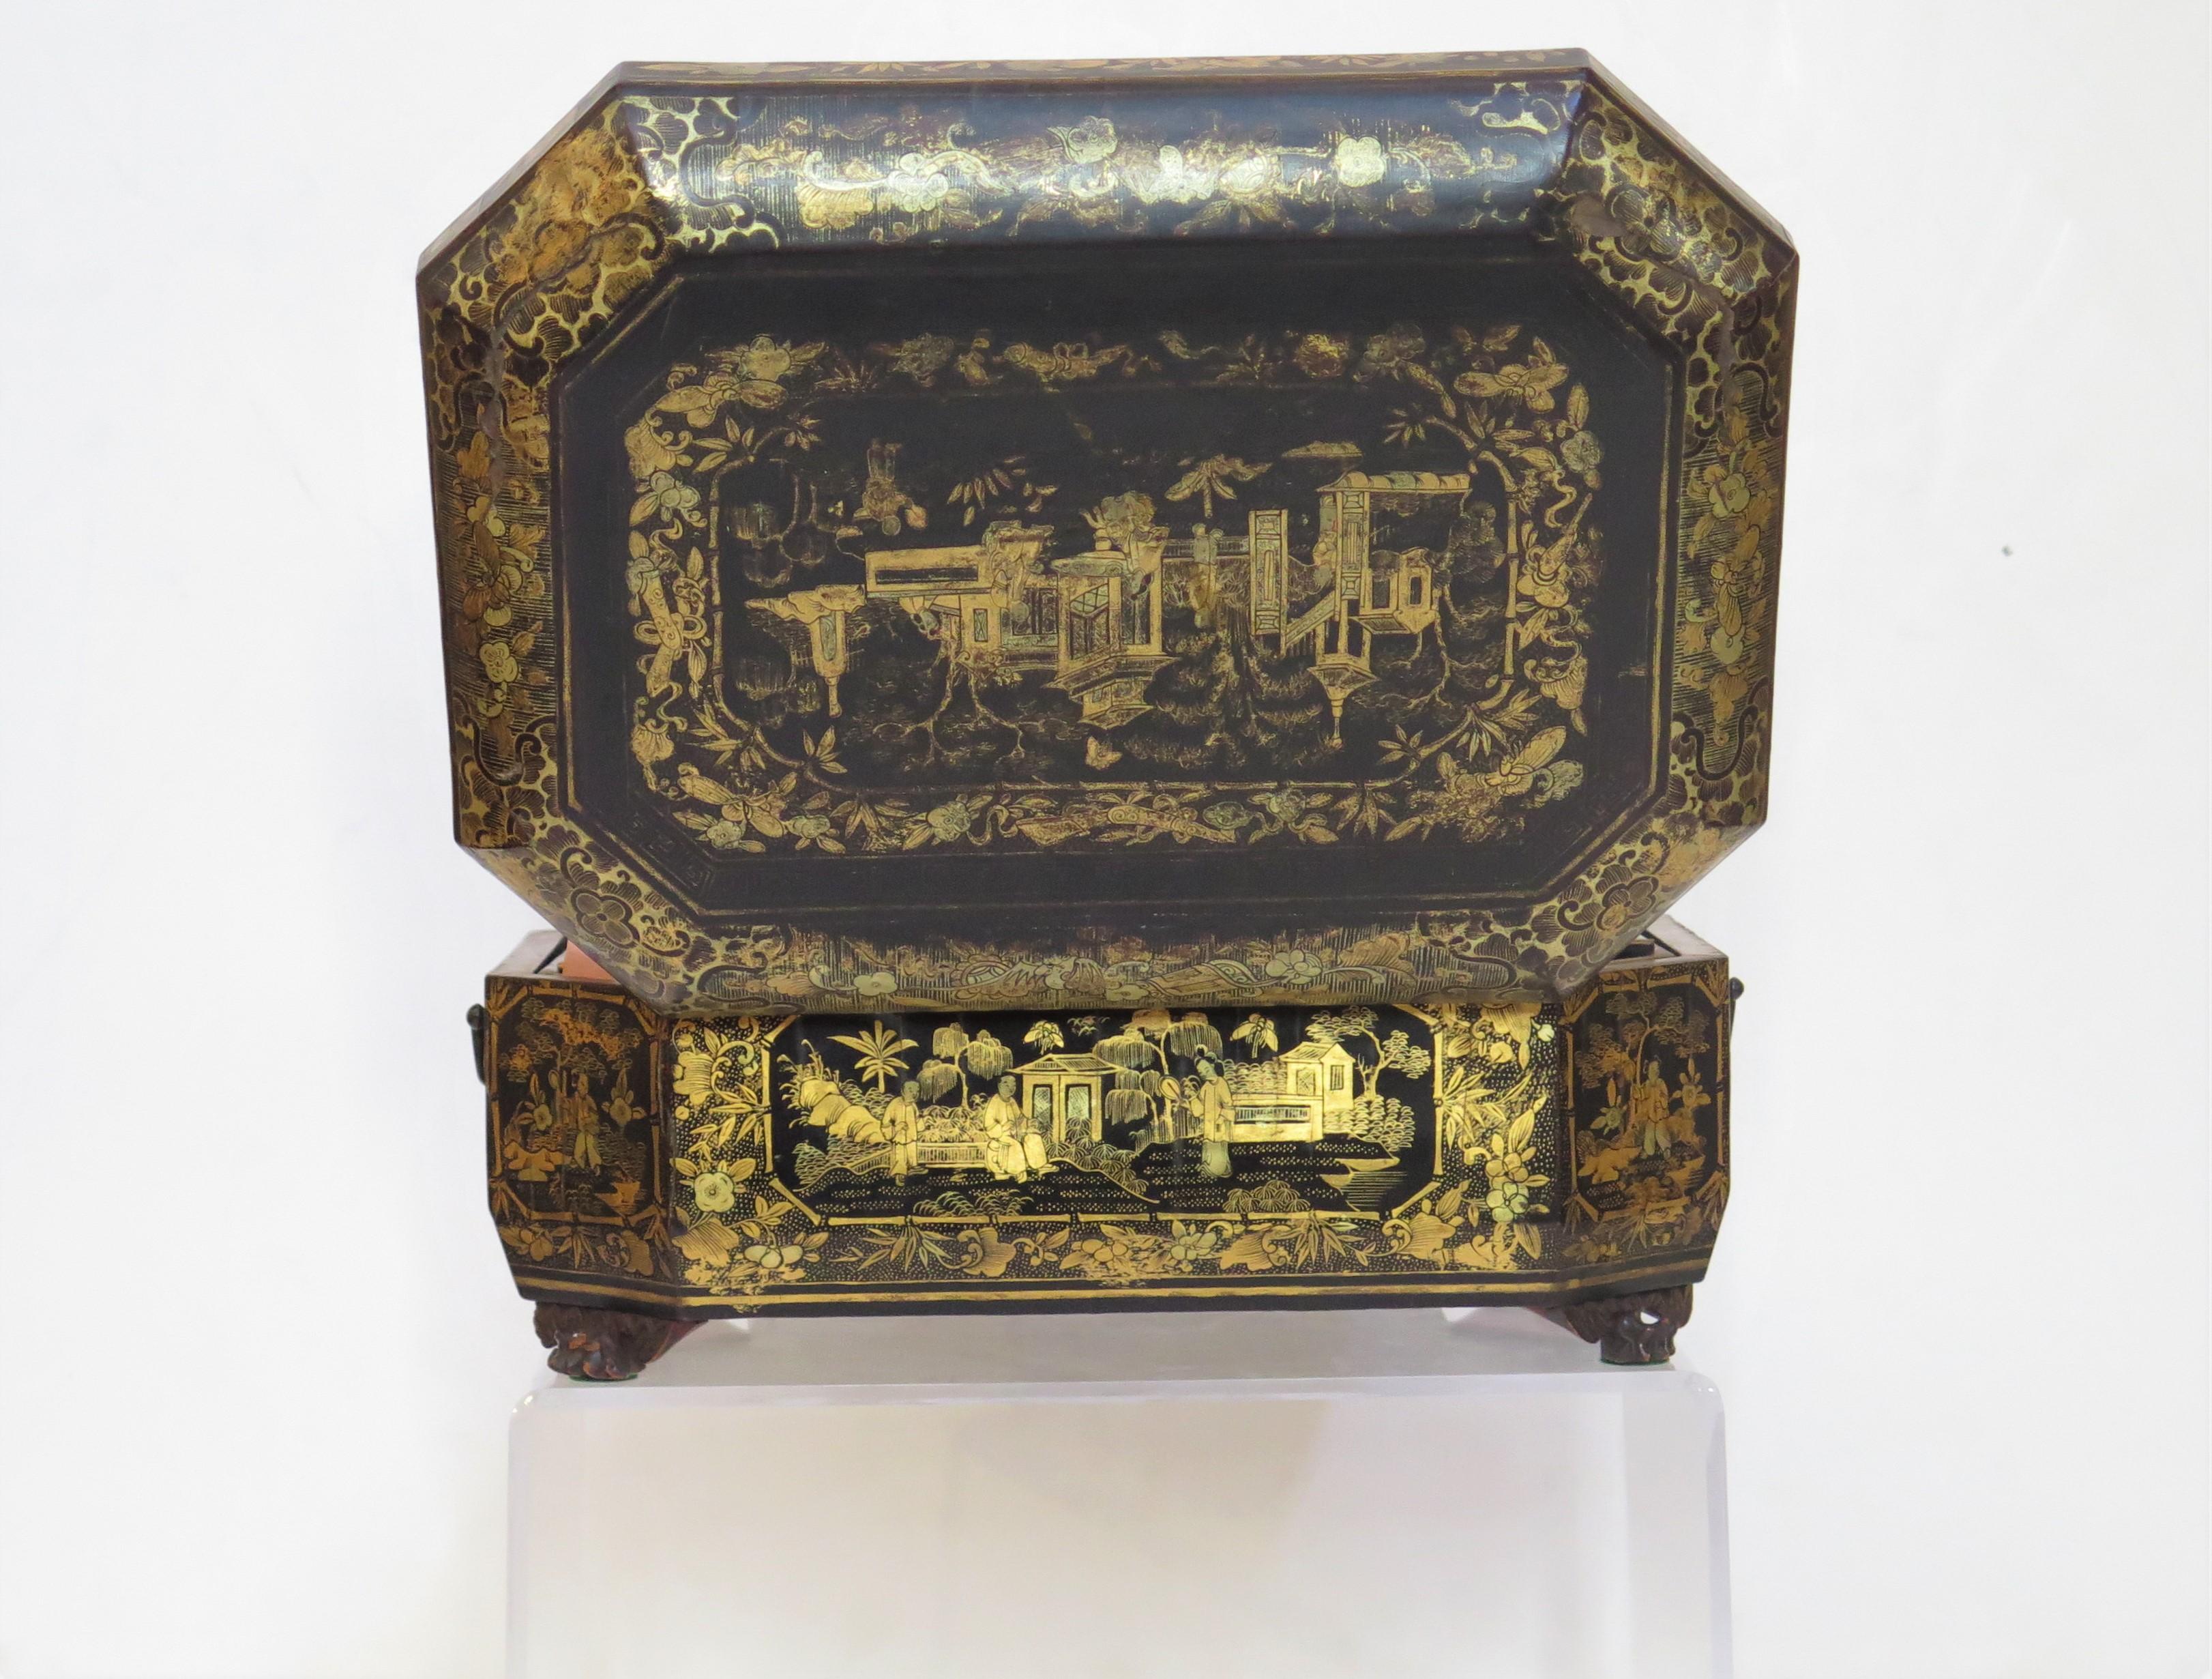 Ealy 19th Century Chinese Export Lacquer Sewing Box For Sale 10